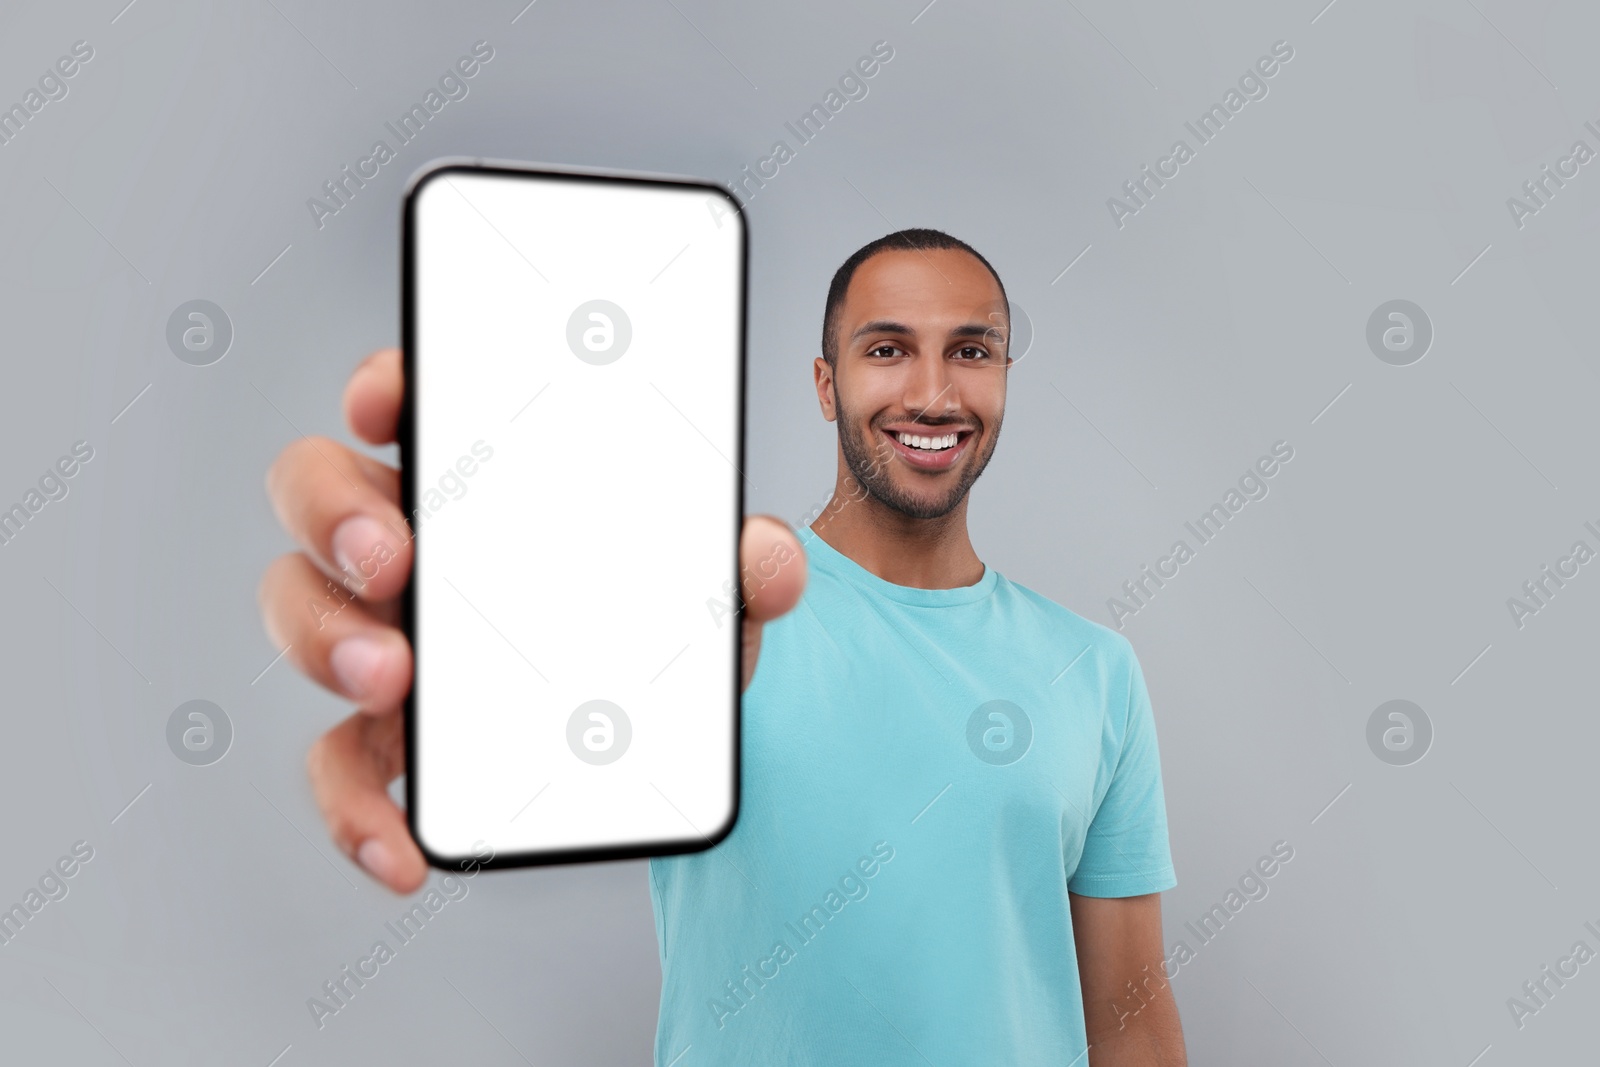 Photo of Young man showing smartphone in hand on light grey background